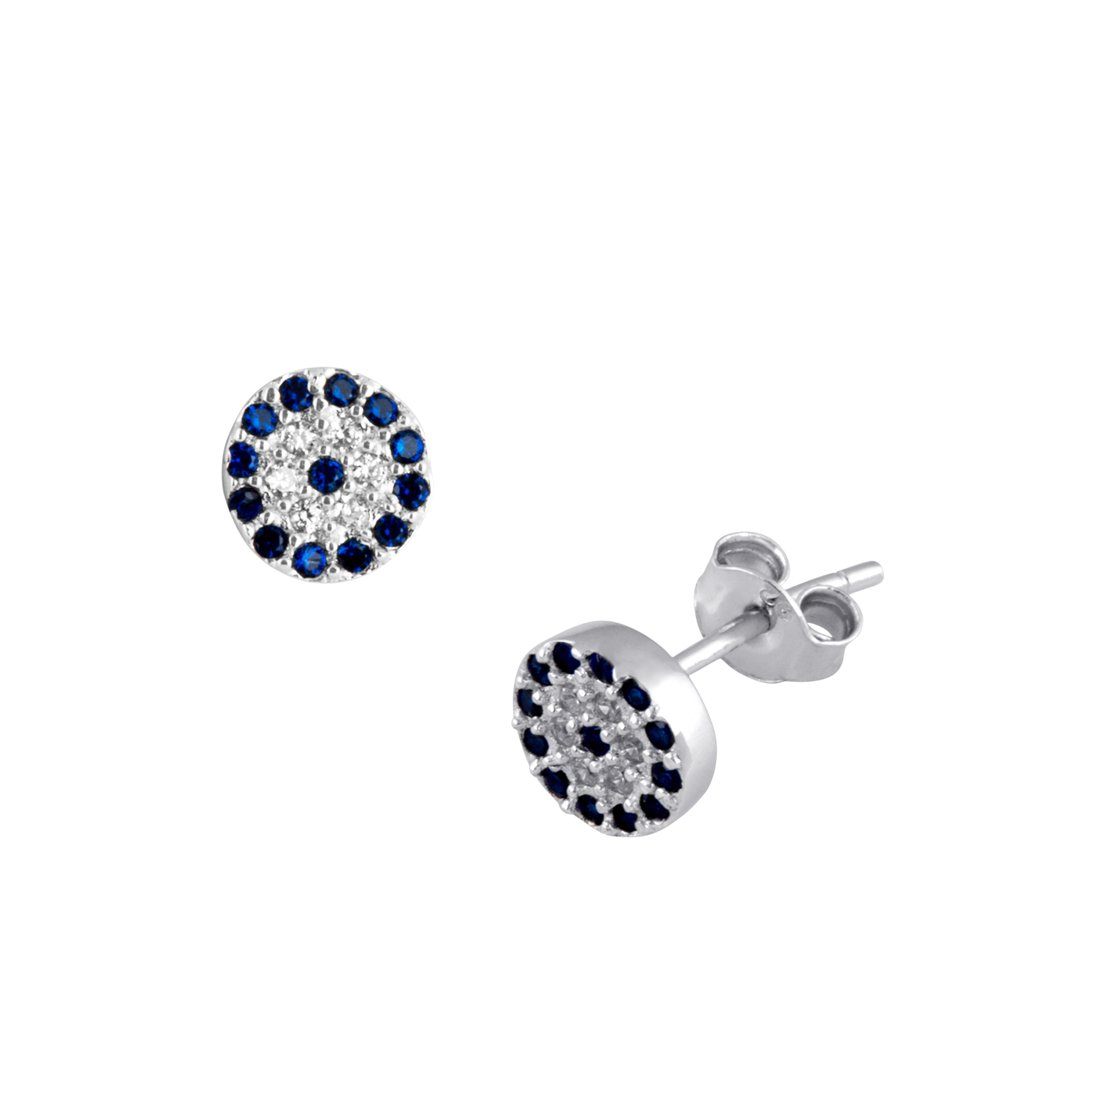 Sterling Silver White and Blue Cubic Zirconia Stud Earrings Earrings Bevilles 